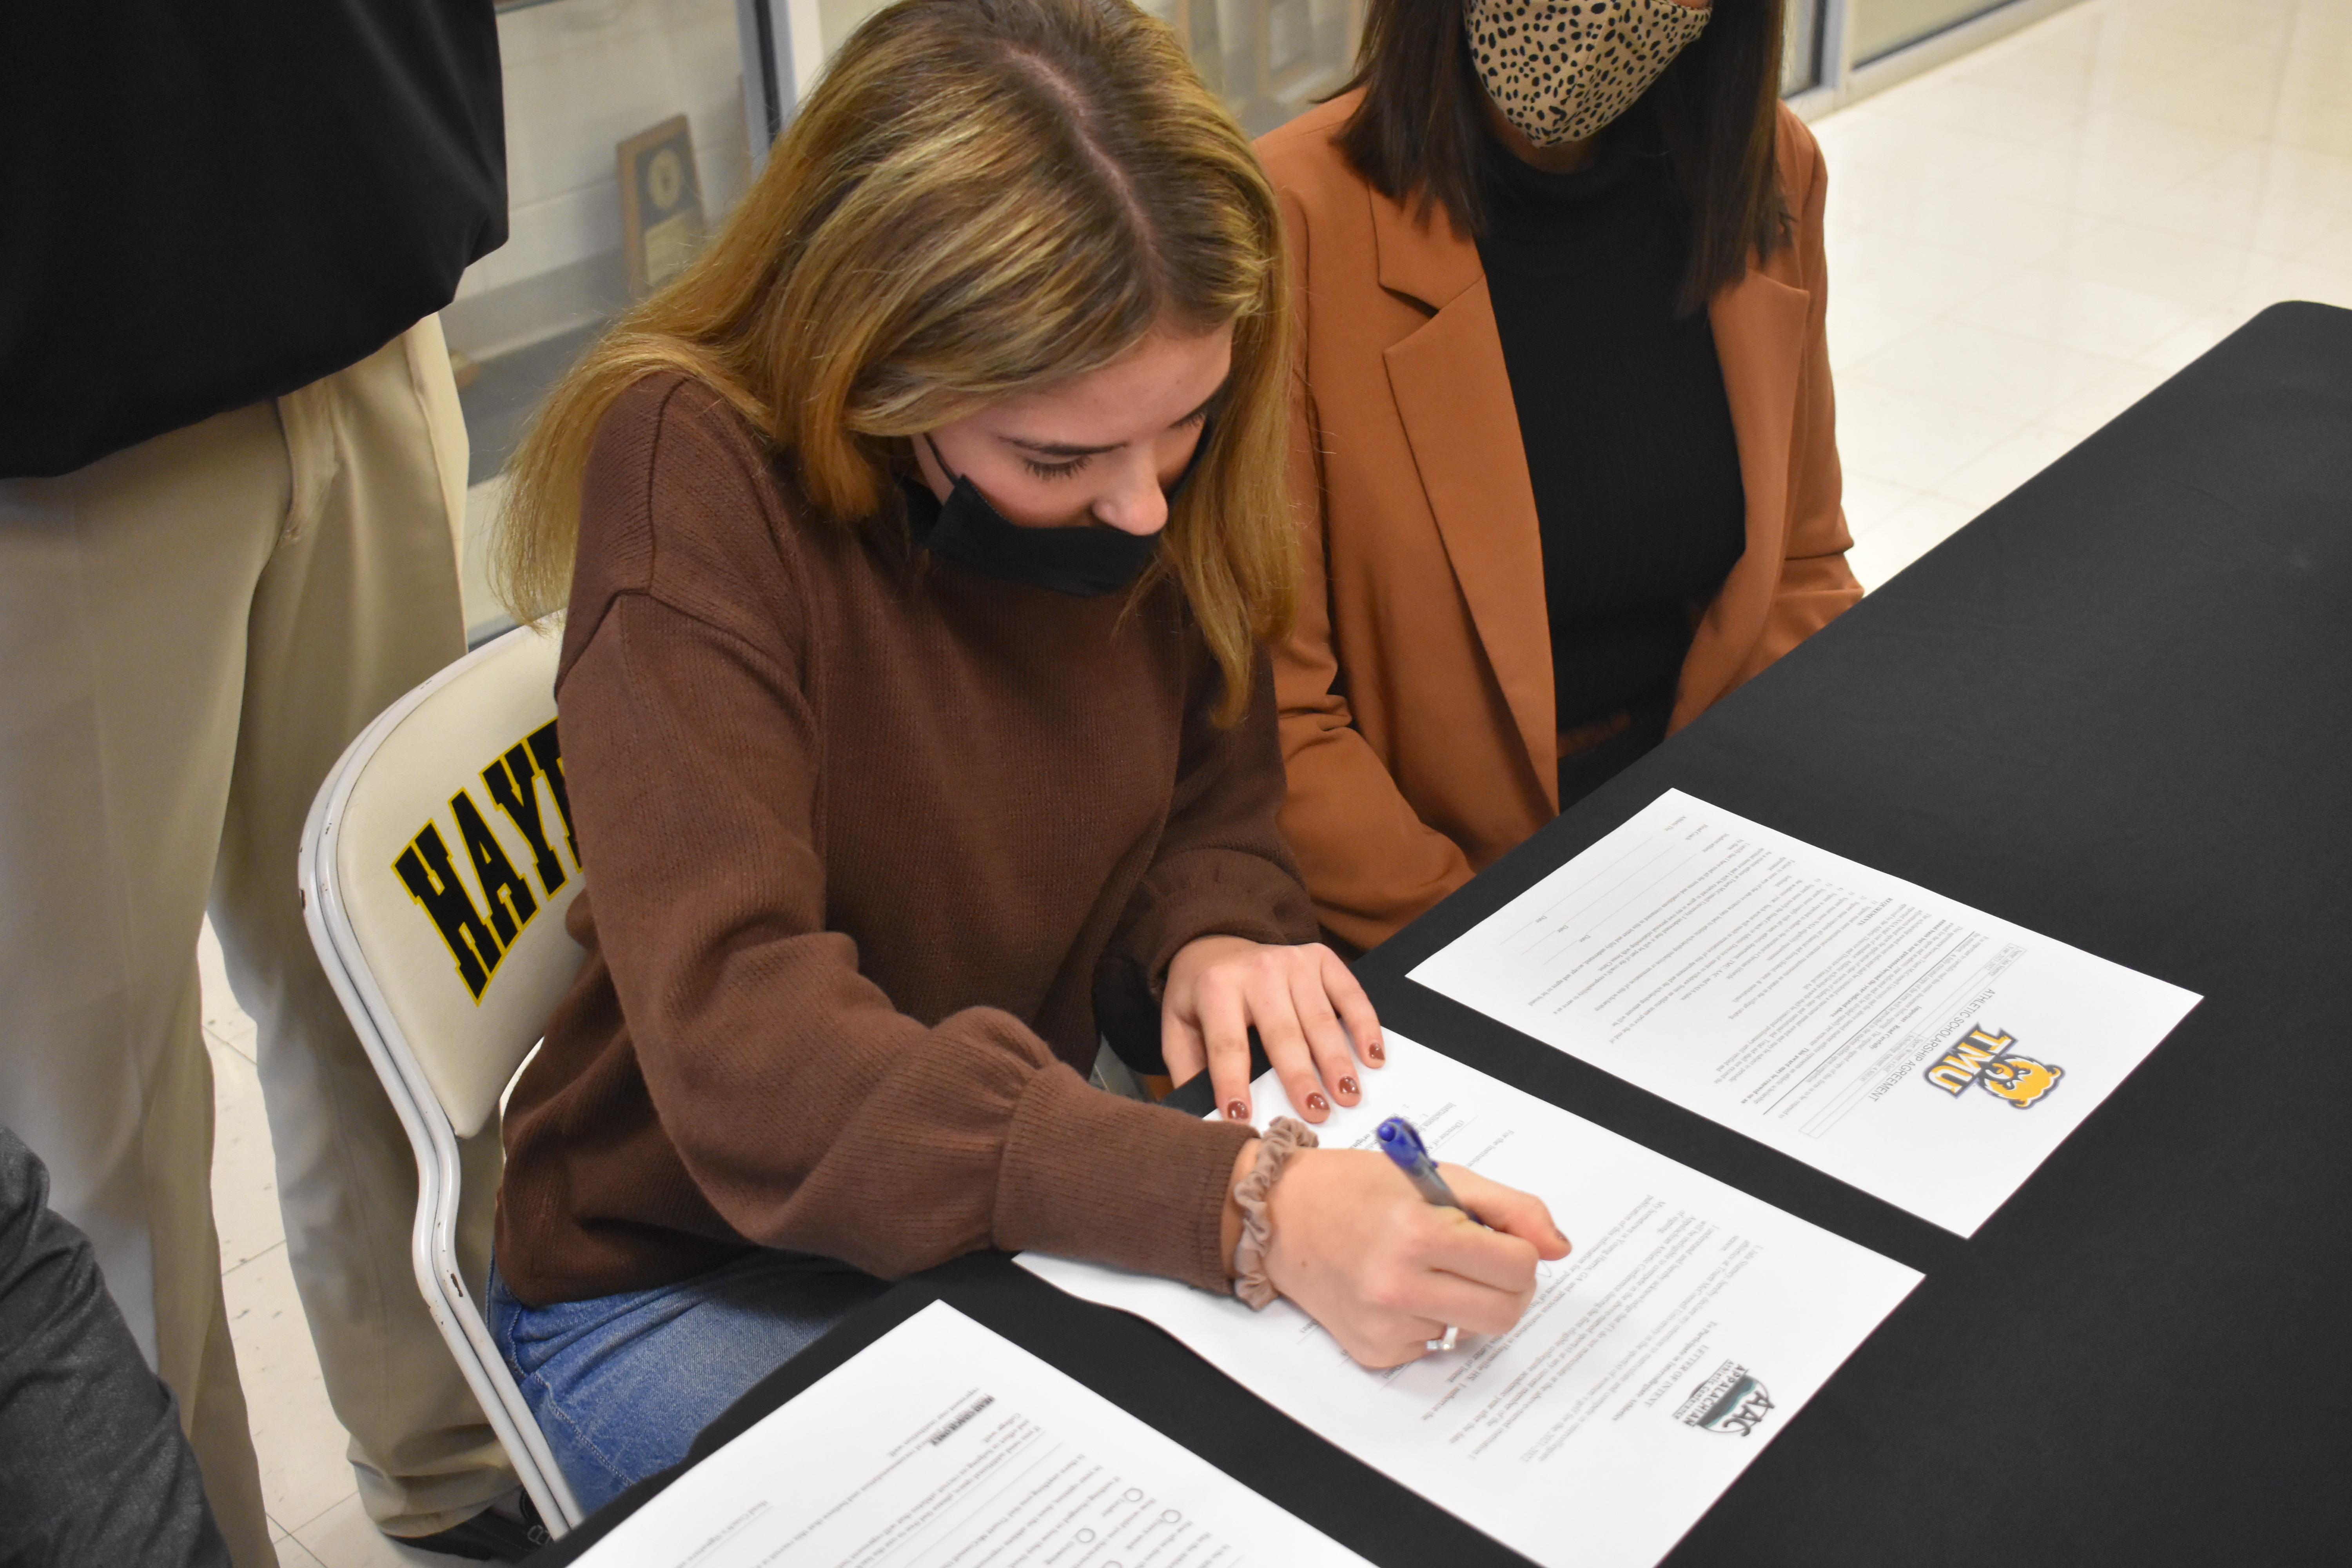 (Photo by Travis Dockery/ Clay County Progress) Jala Stamey makes it official by signing her letter of intent.